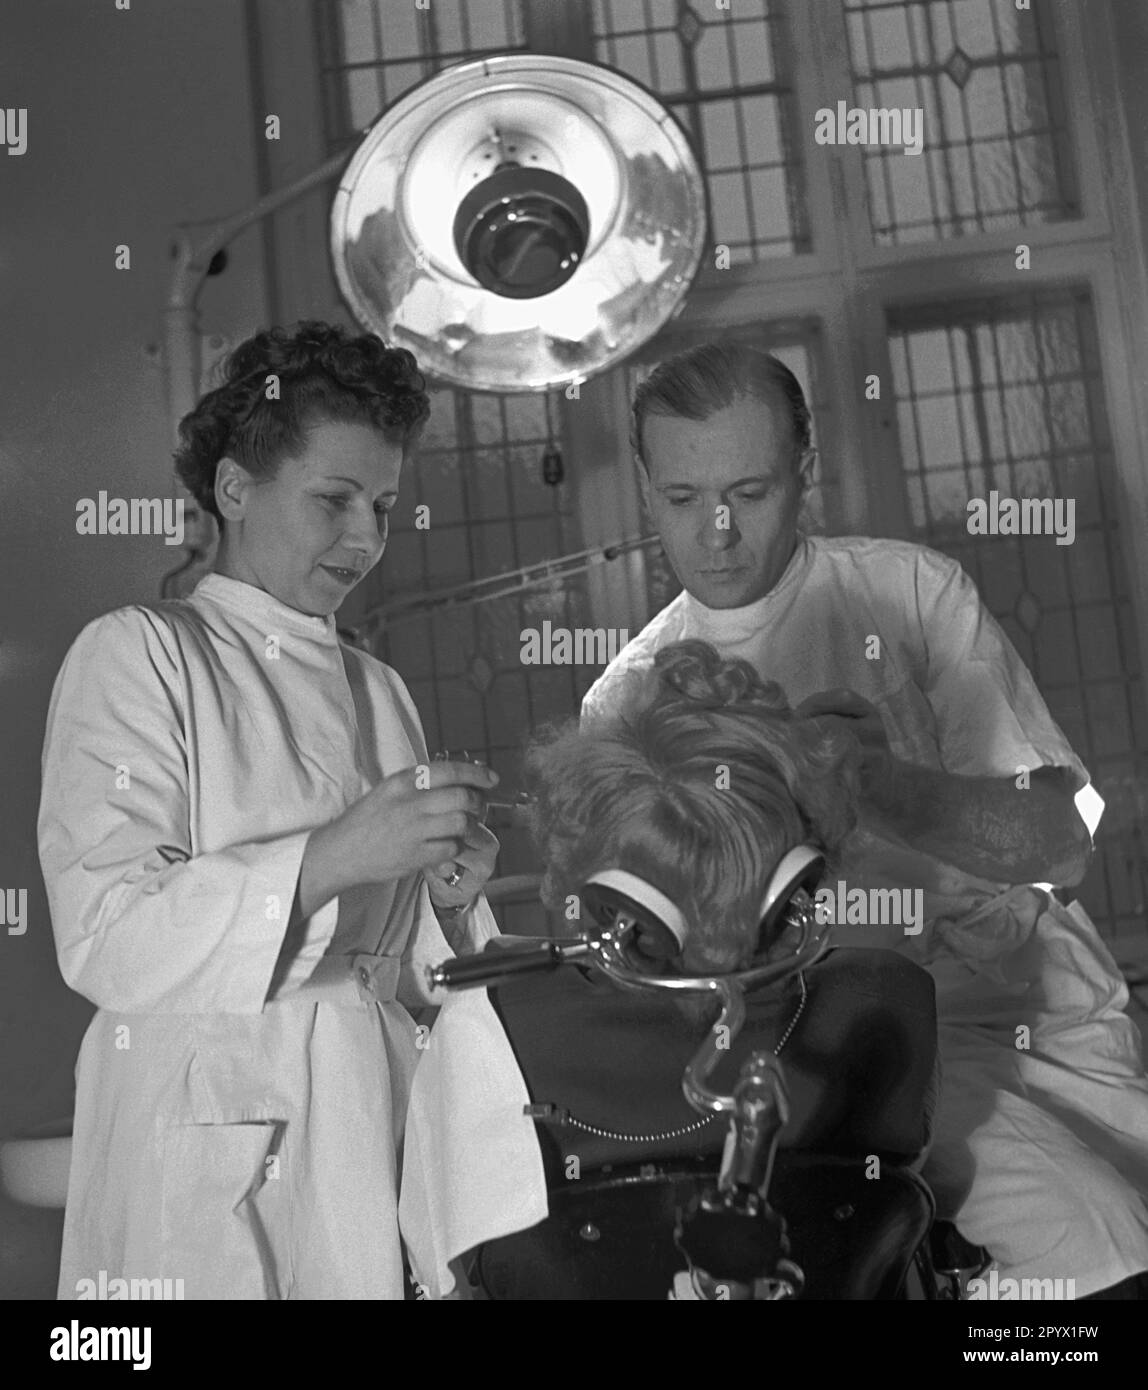 'Dentist Freese treats a patient. He is supported by a doctor. Scene from the series ''We work together''. The photographer accompanies couples in their respective occupations.' Stock Photo